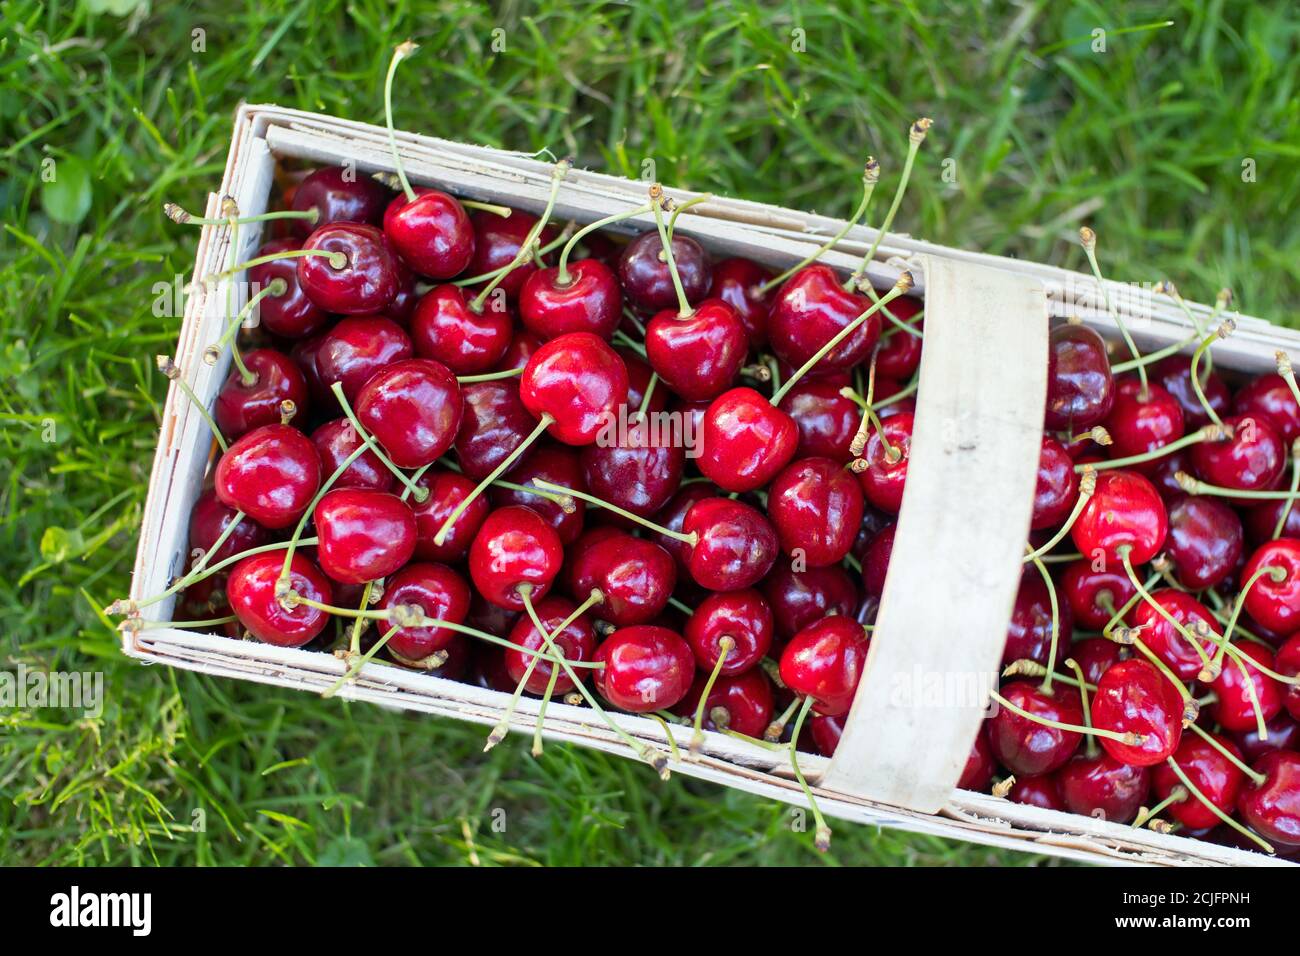 Ripe cherries in the basket on the lawn Stock Photo